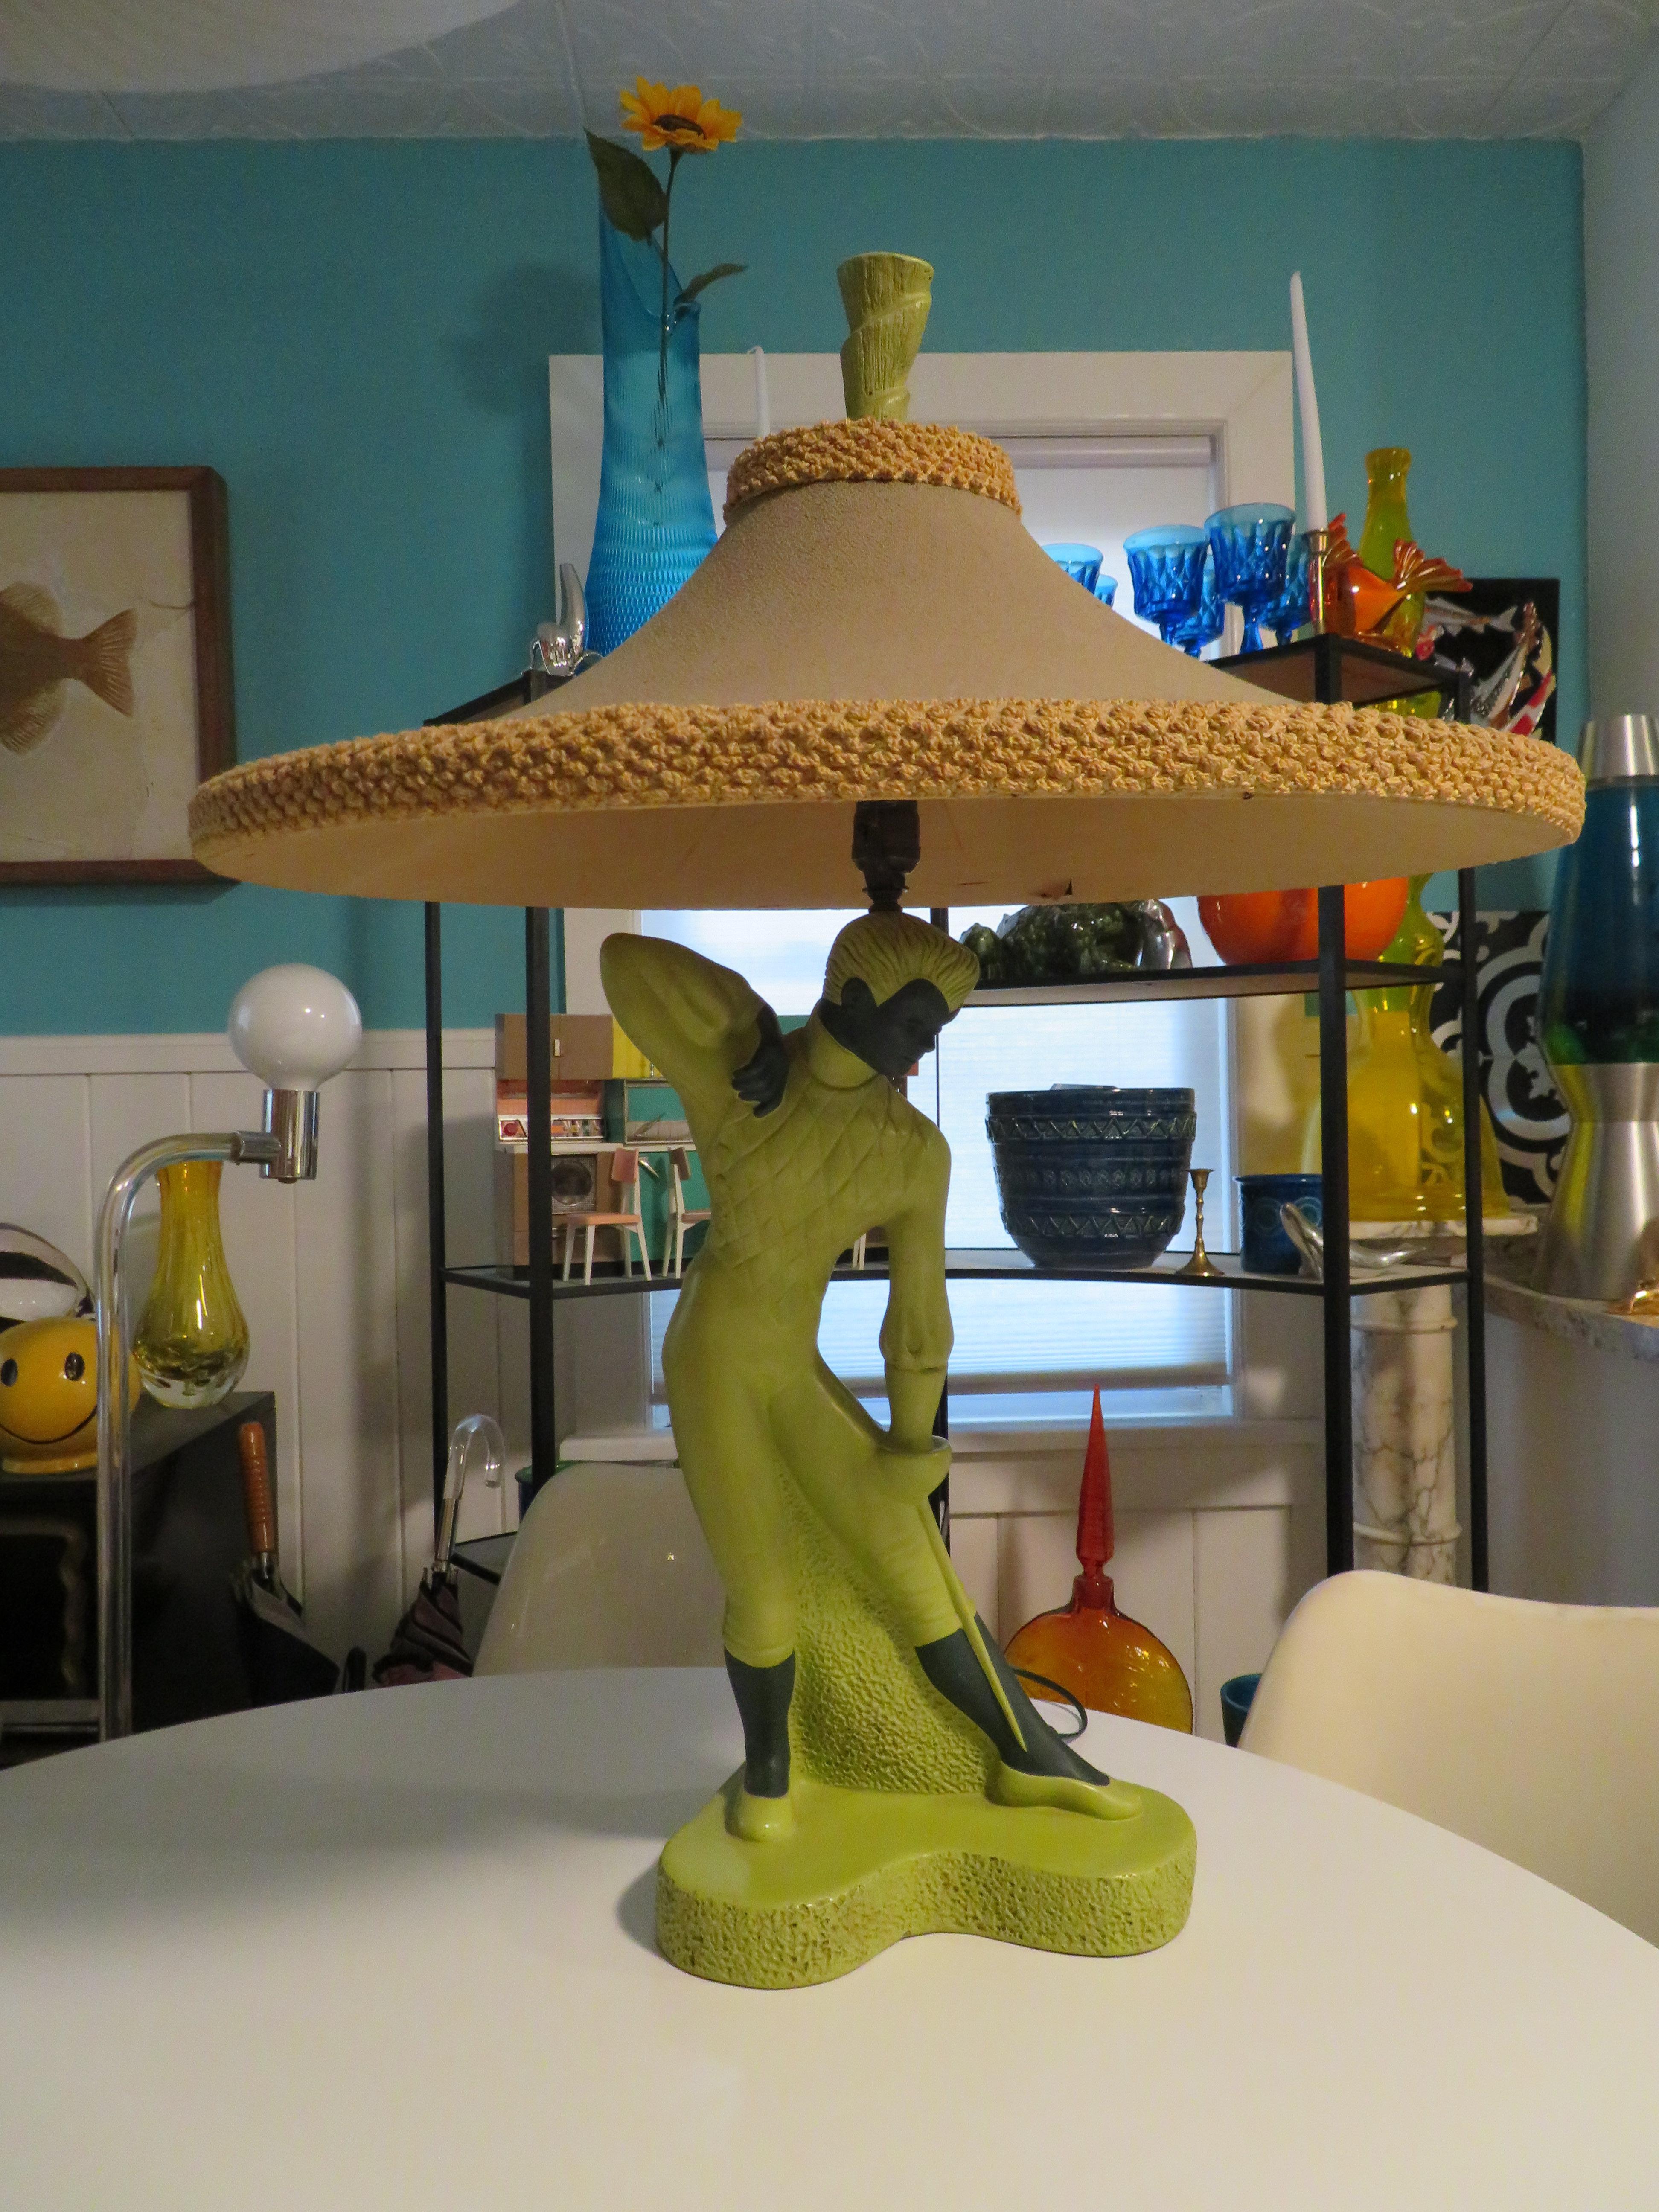 All original vintage rare Reglor of California lamp, featuring a gorgeous lime green/ brown male fencer. Signed Reglor of California and is dated 1951 and includes an original Reglor shade. The lamp shade will need to be redone-original fabric is